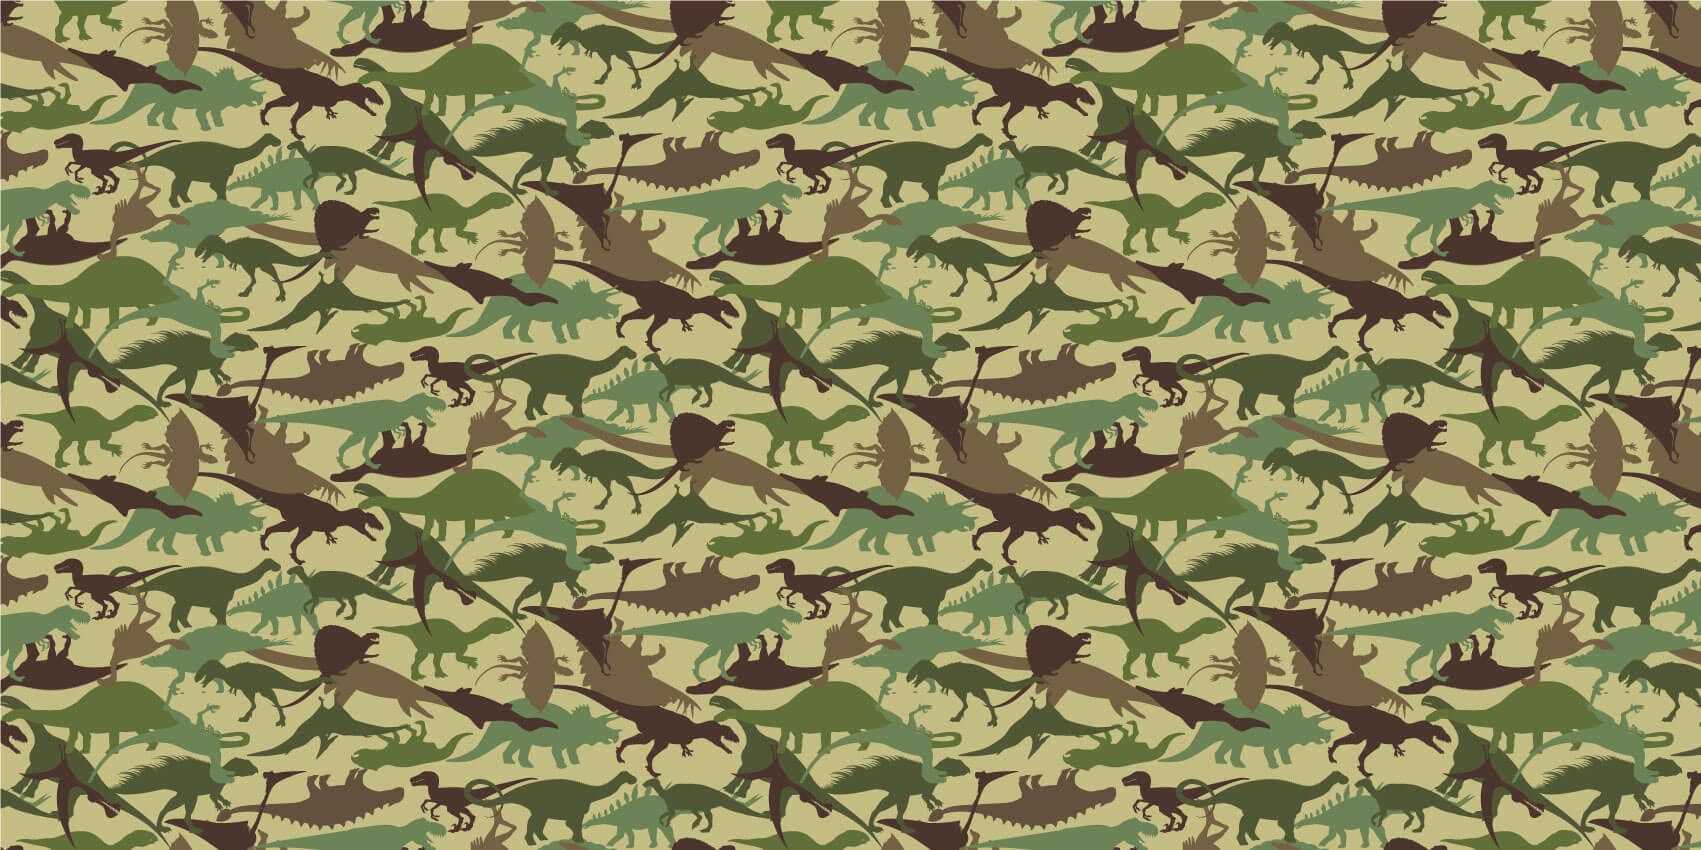 Dinosaures - Dino camouflage  - Chambre d'enfants